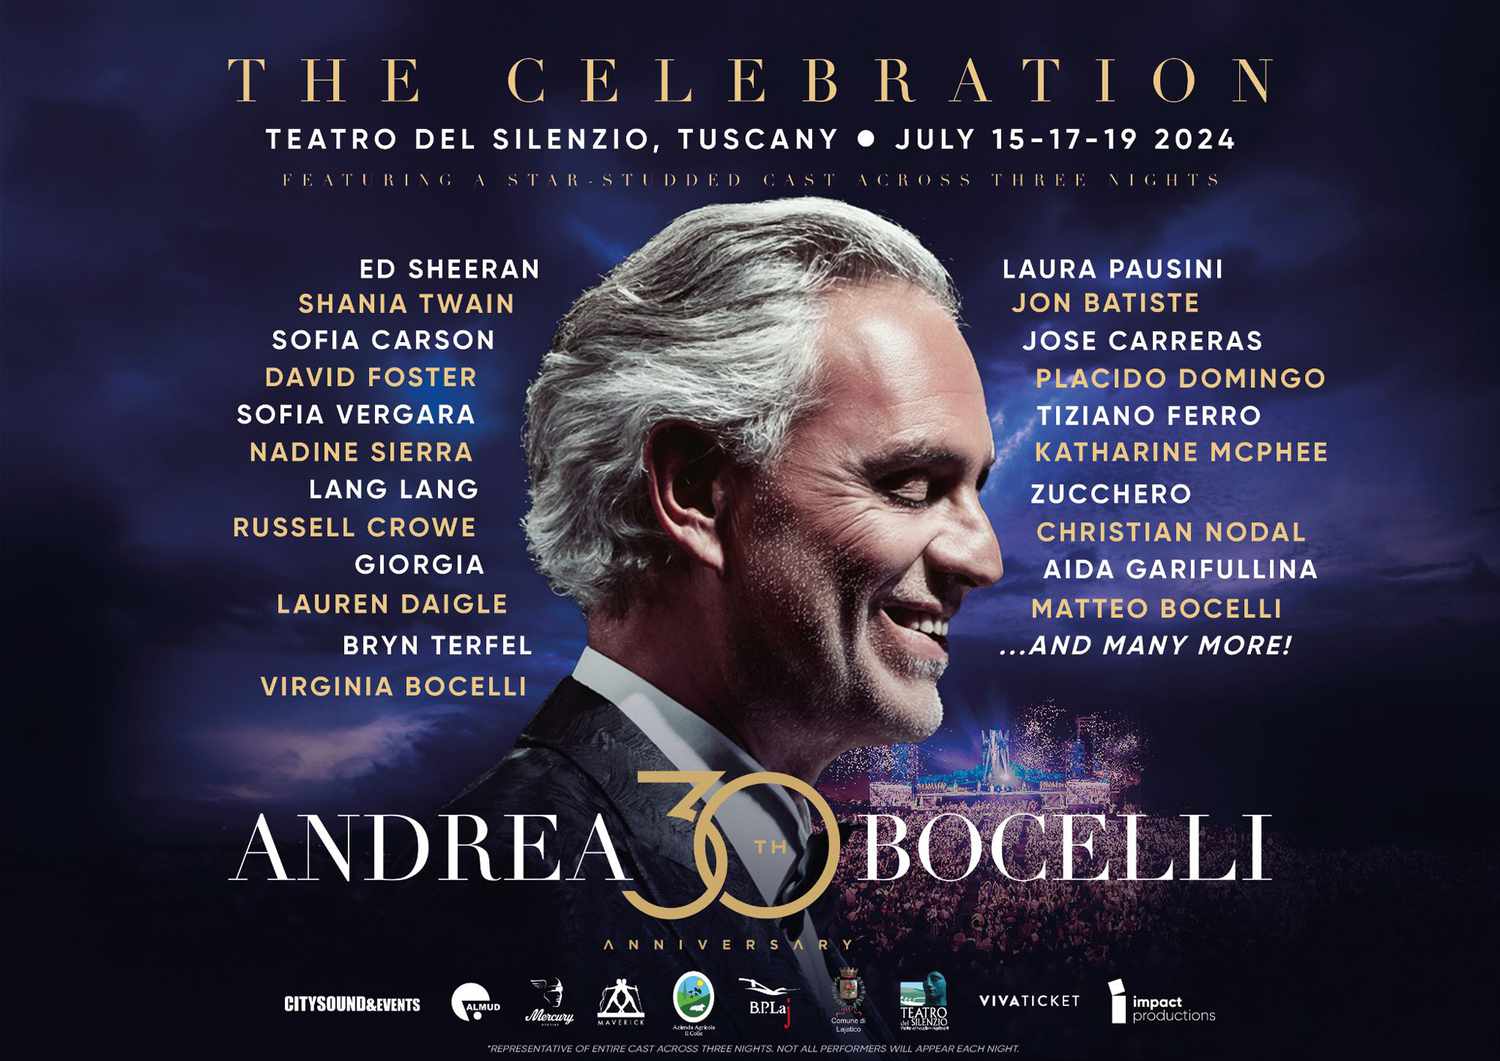 Andrea Bocelli Is Celebrating 30 Years in Music With 3-Day Concert Event